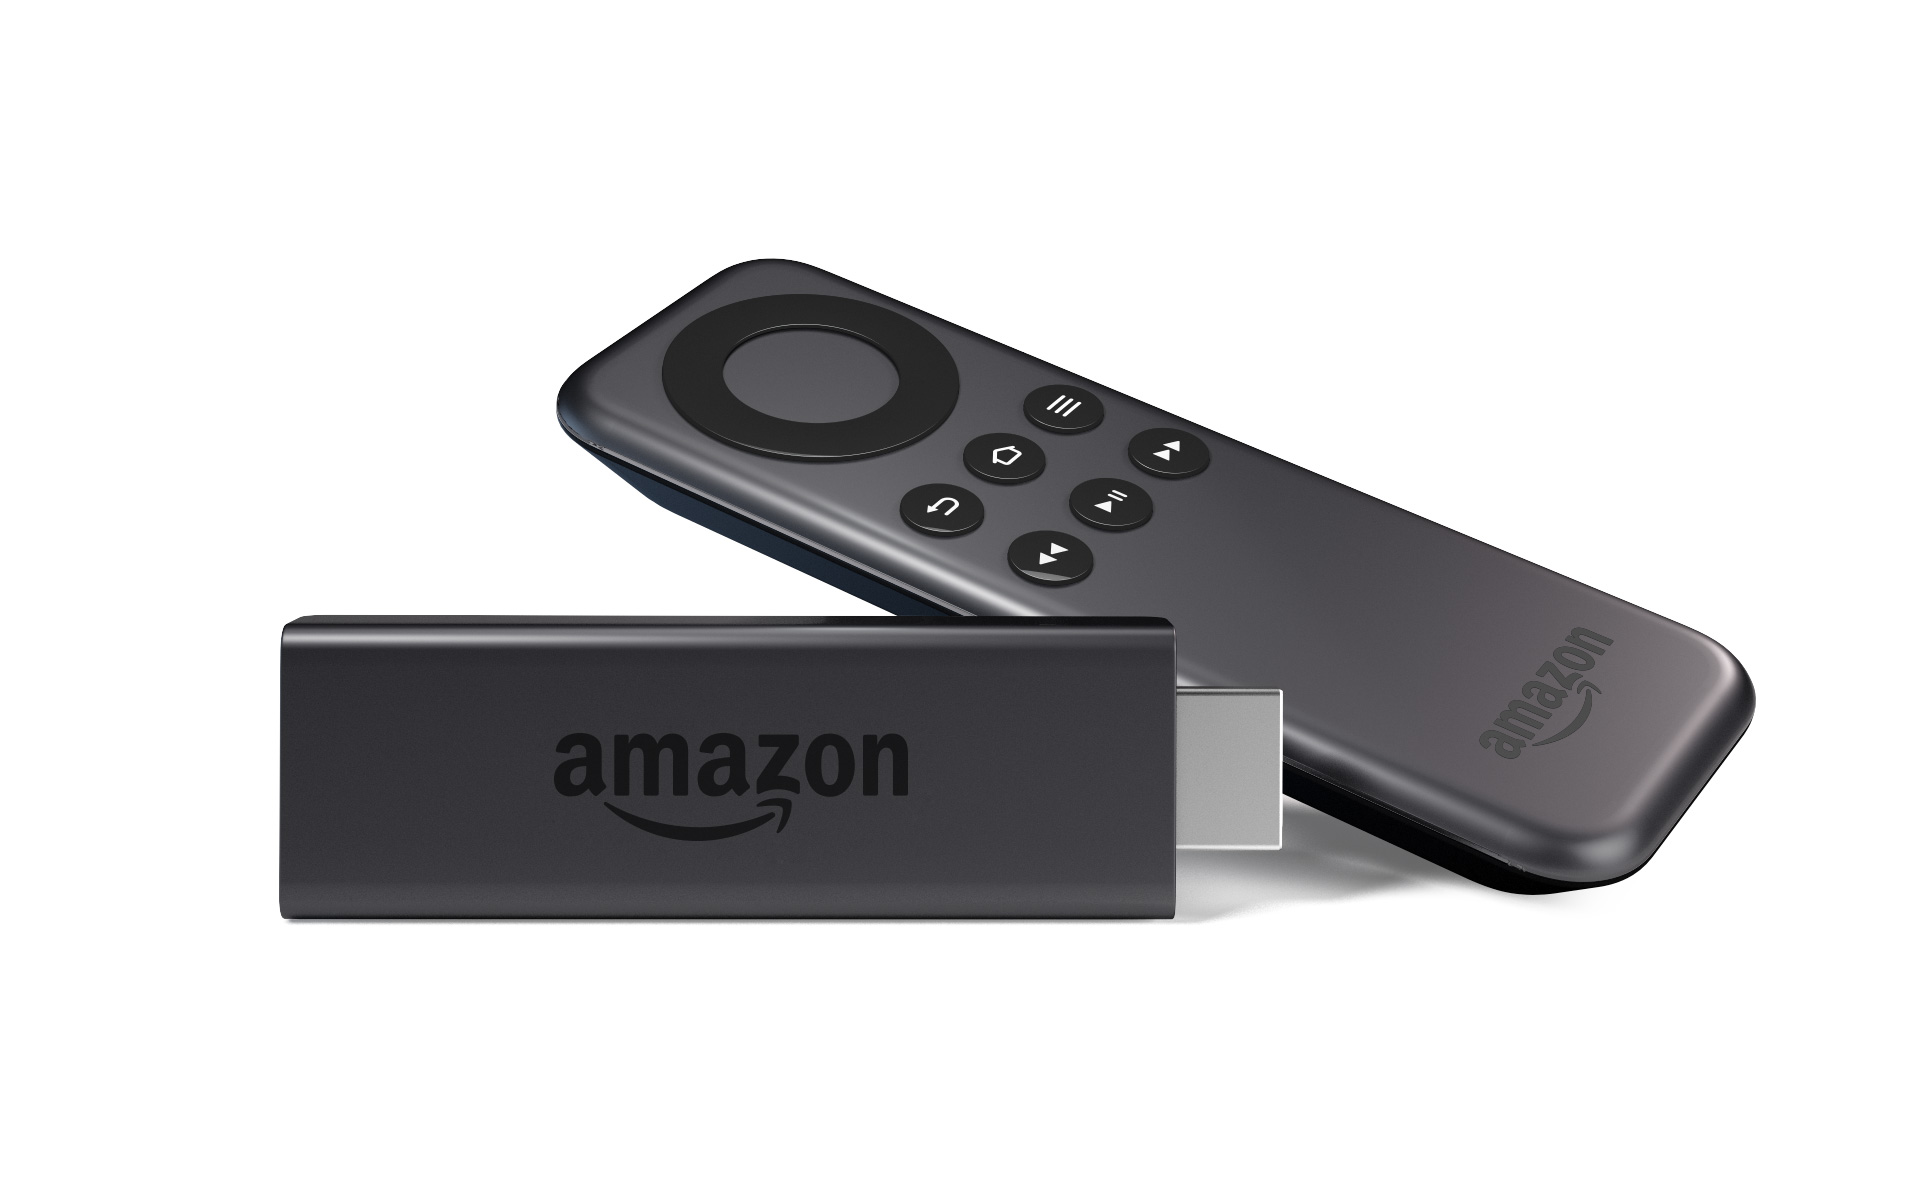 Deal: $15 off the Amazon Fire TV Stick at Best Buy - Phandroid